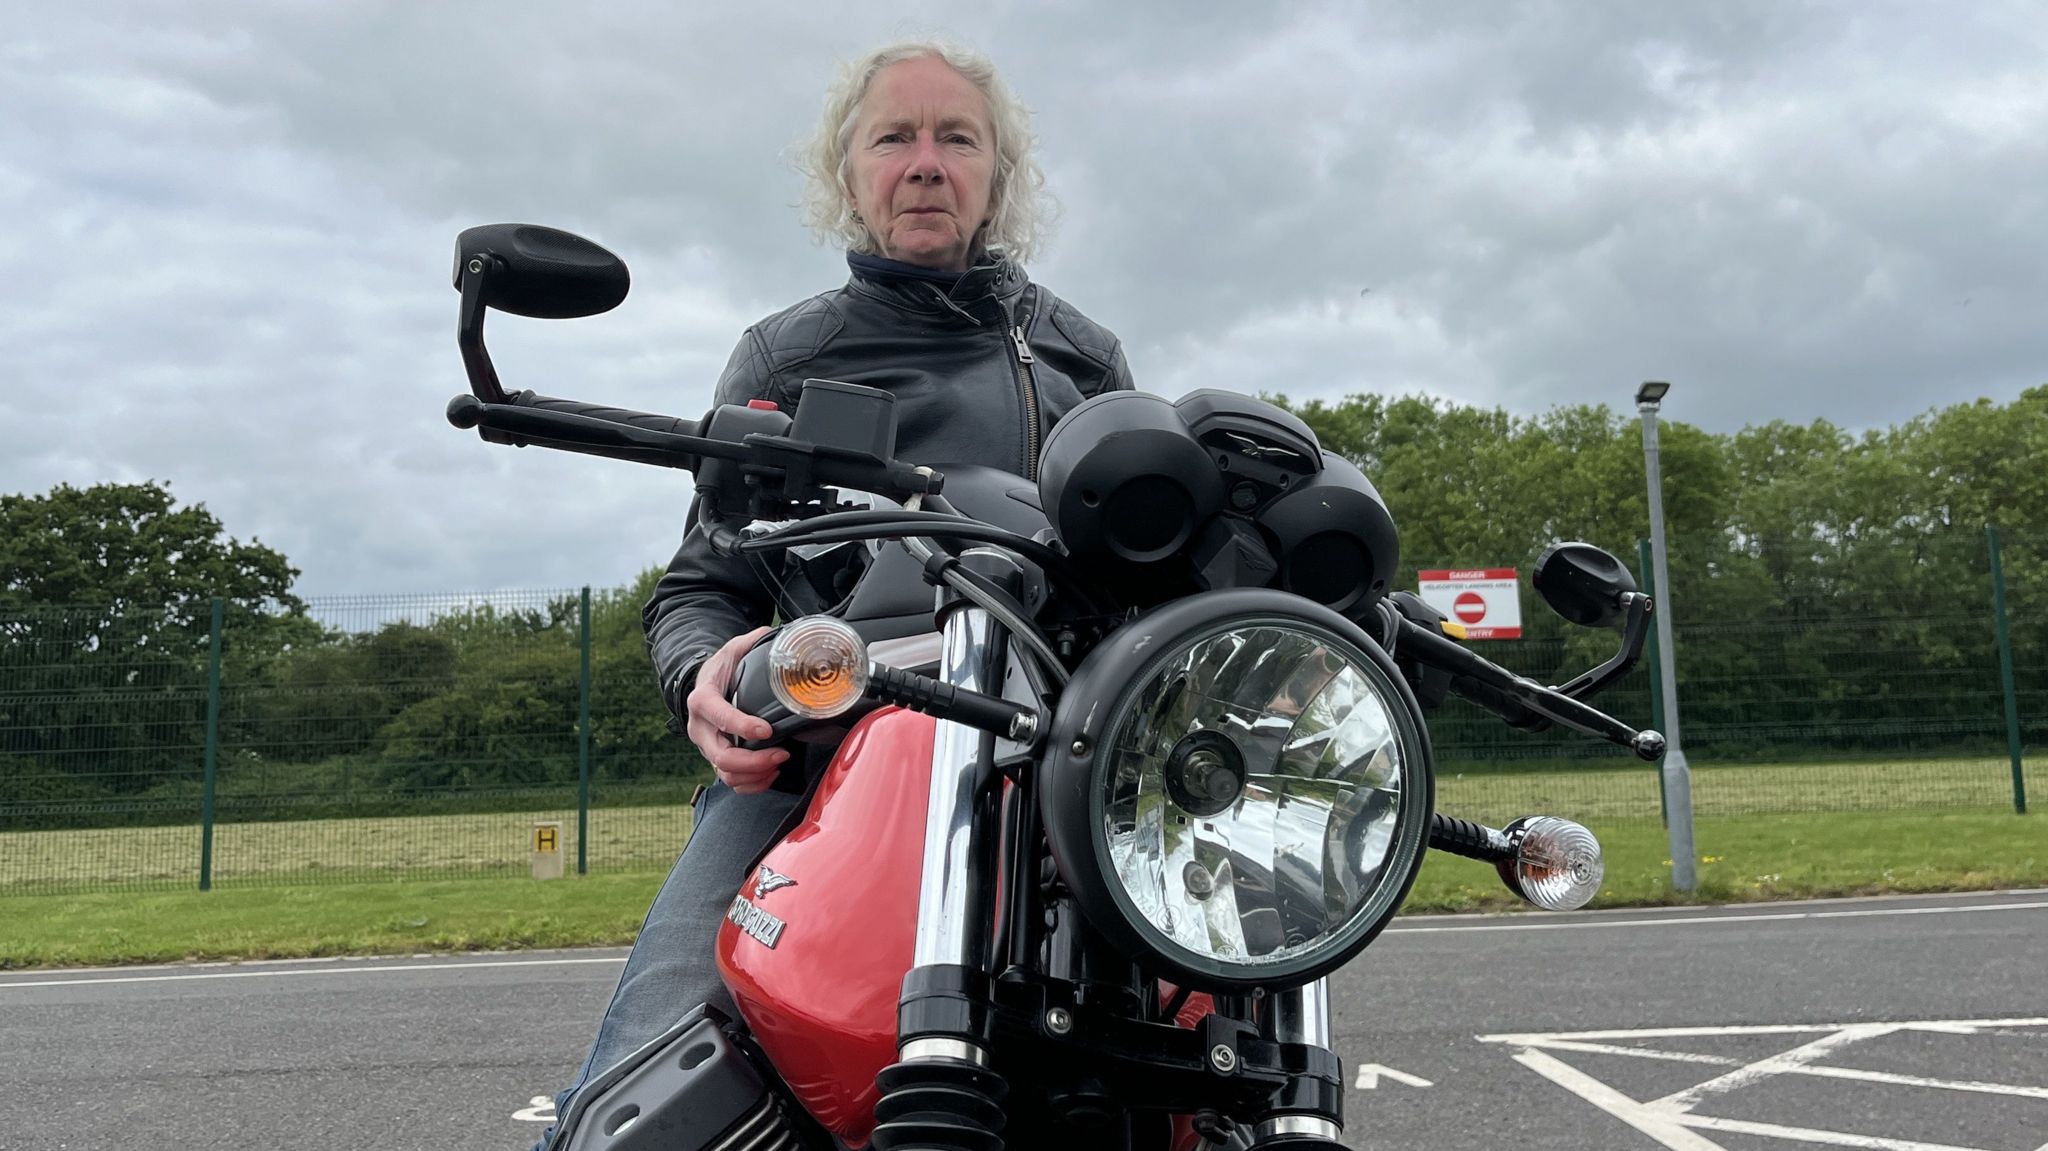 Julie Swain wearing her leather motorbike jacket and shoulder length blonde hair, sat on her motorbike parked outside the Wiltshire Air Ambulance airbase